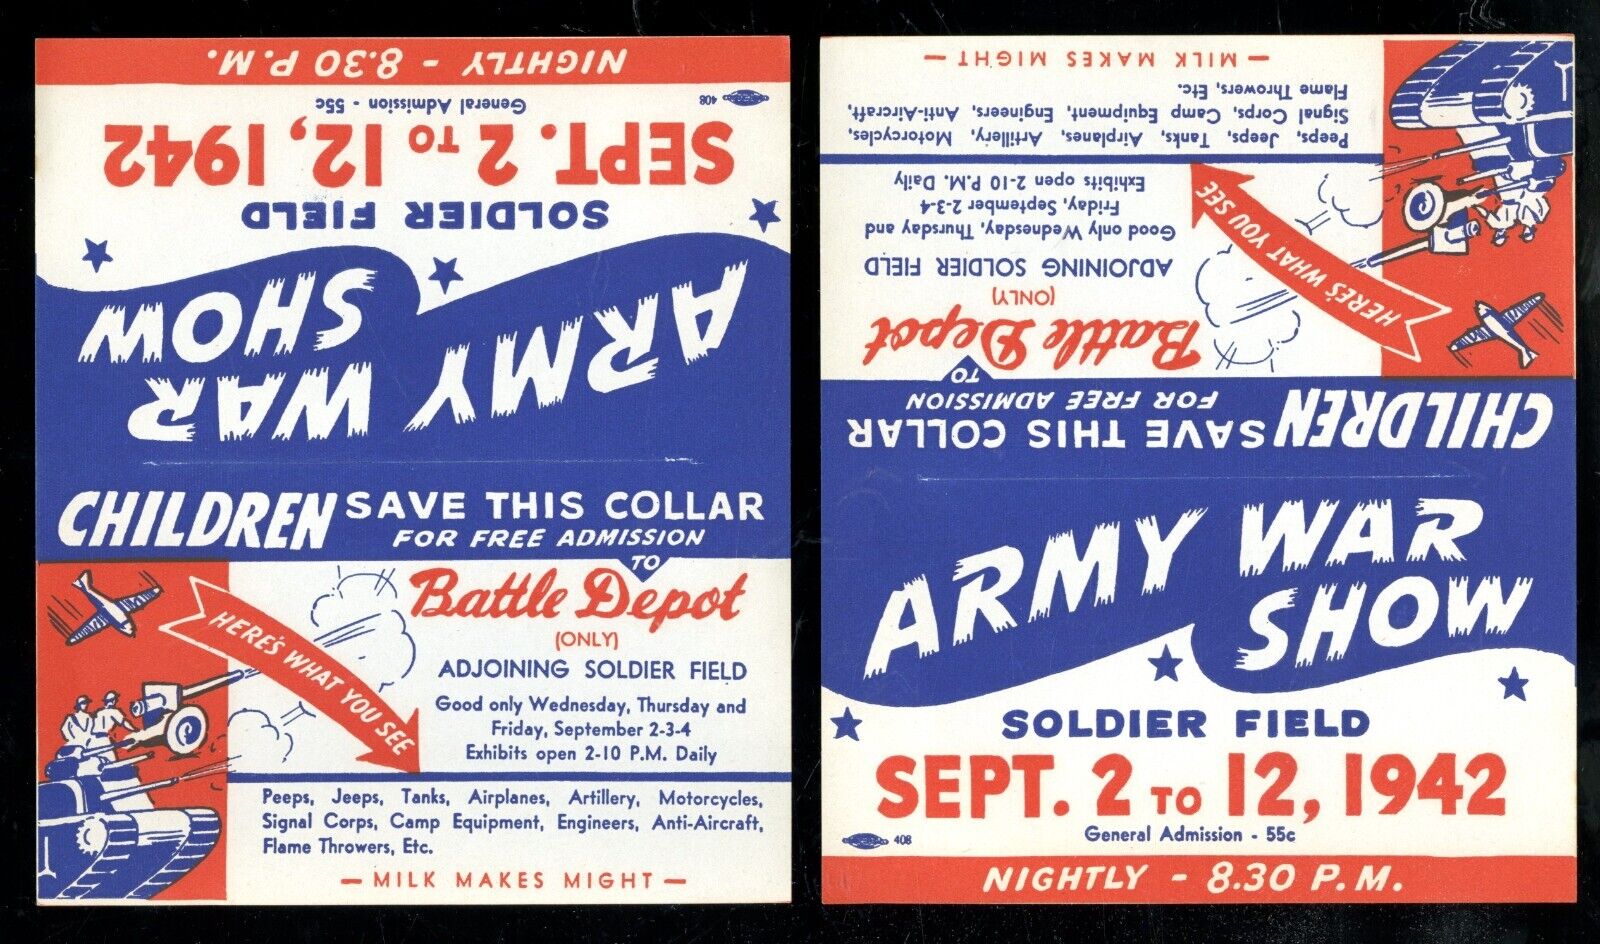 1942 WW II US ARMY WAR SHOW TICKETS Soldier Field Chicago IL Homefront Lot (2)